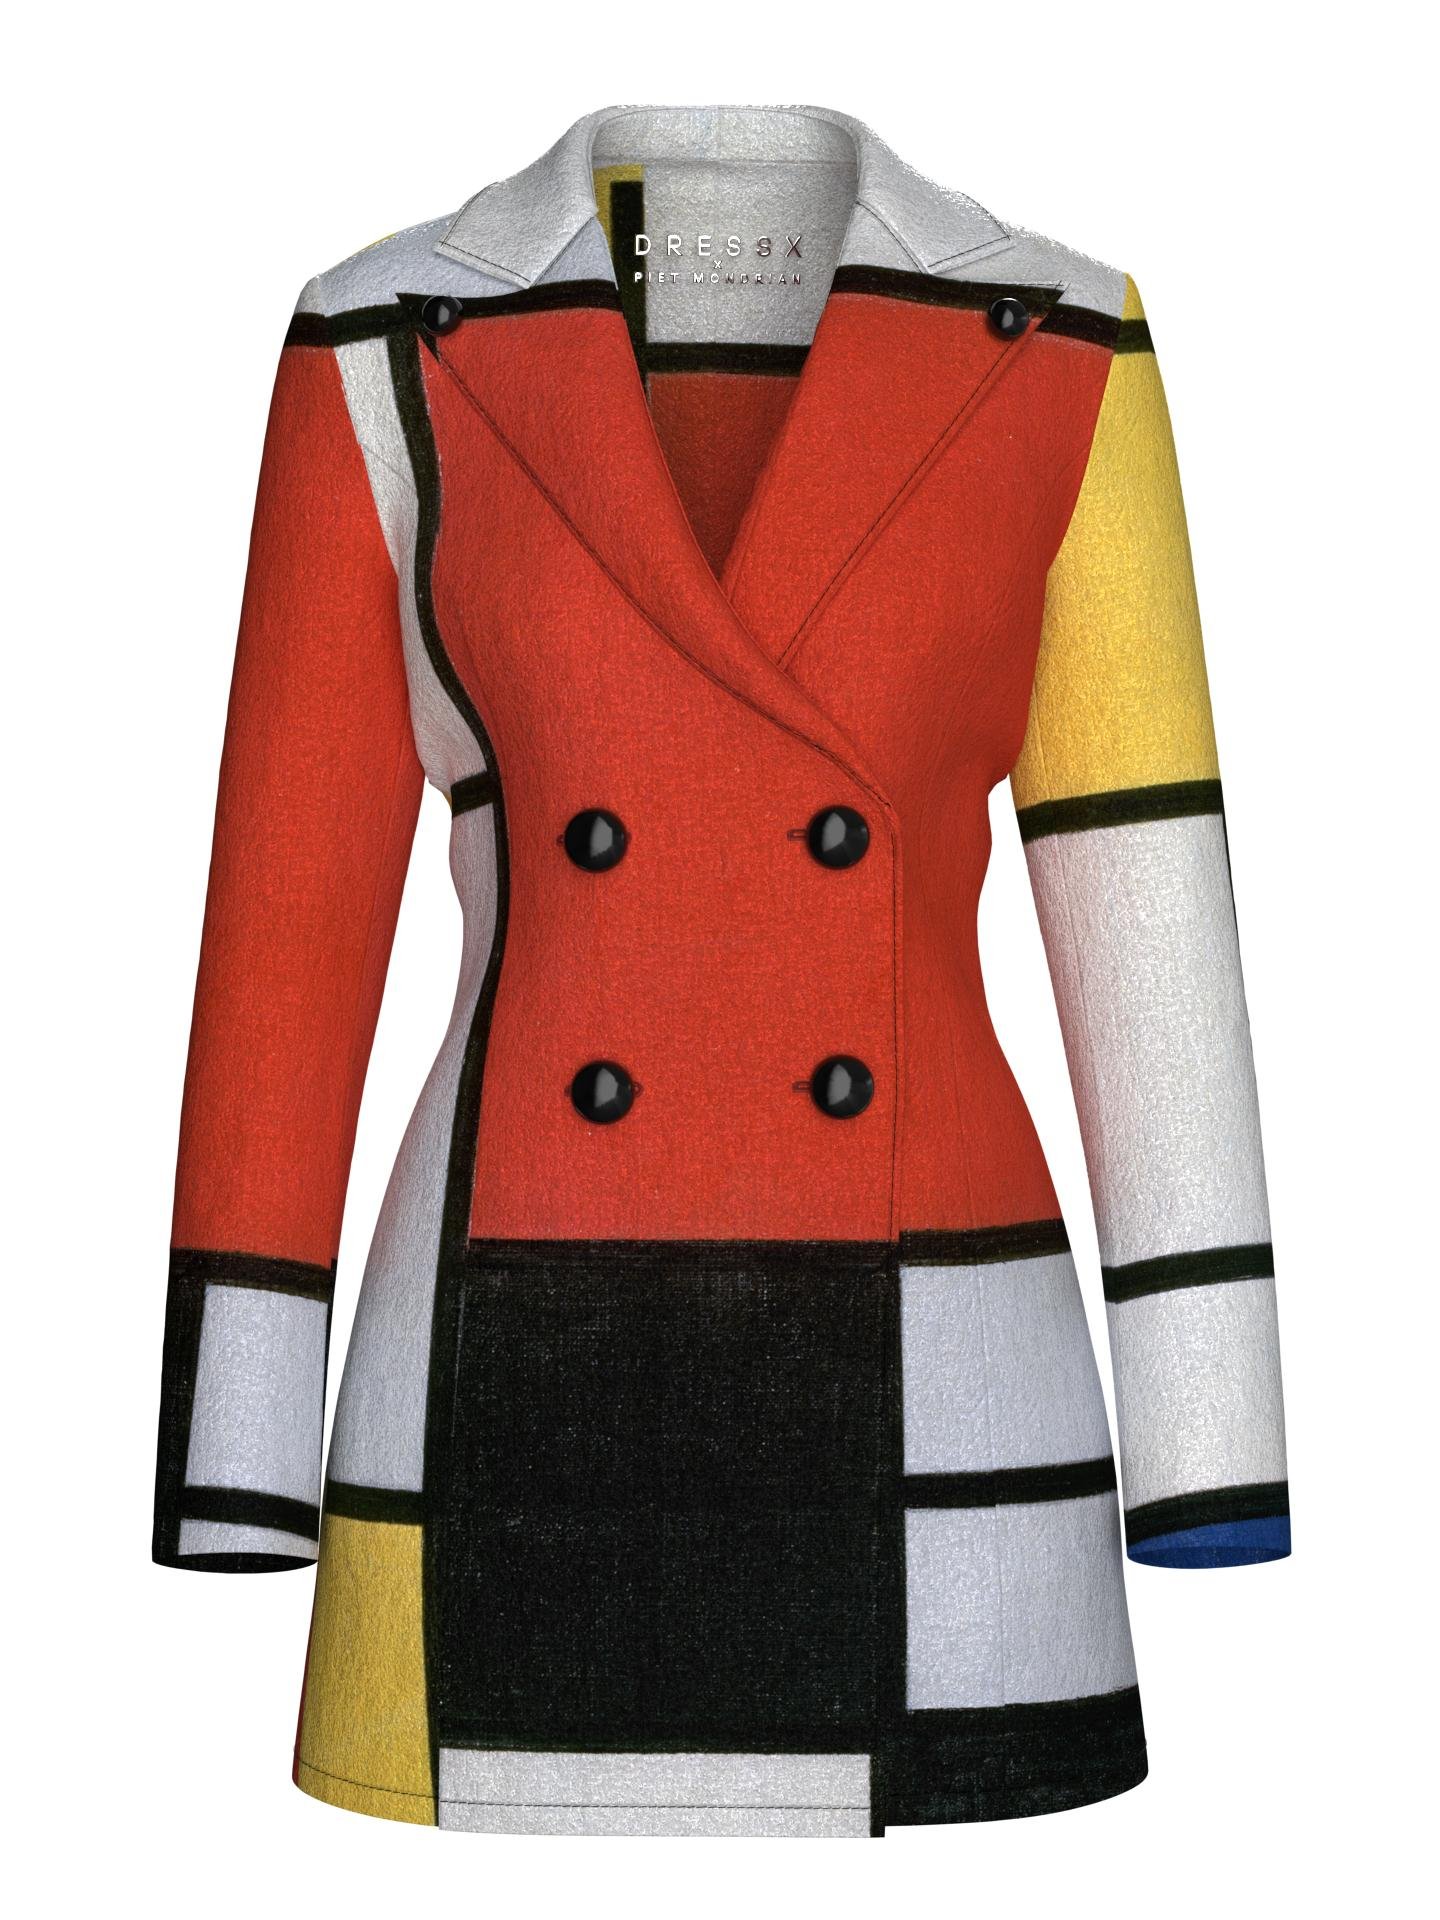 Blazer Dress-Composition with Red, Yellow, Blue and Black by DRESSX